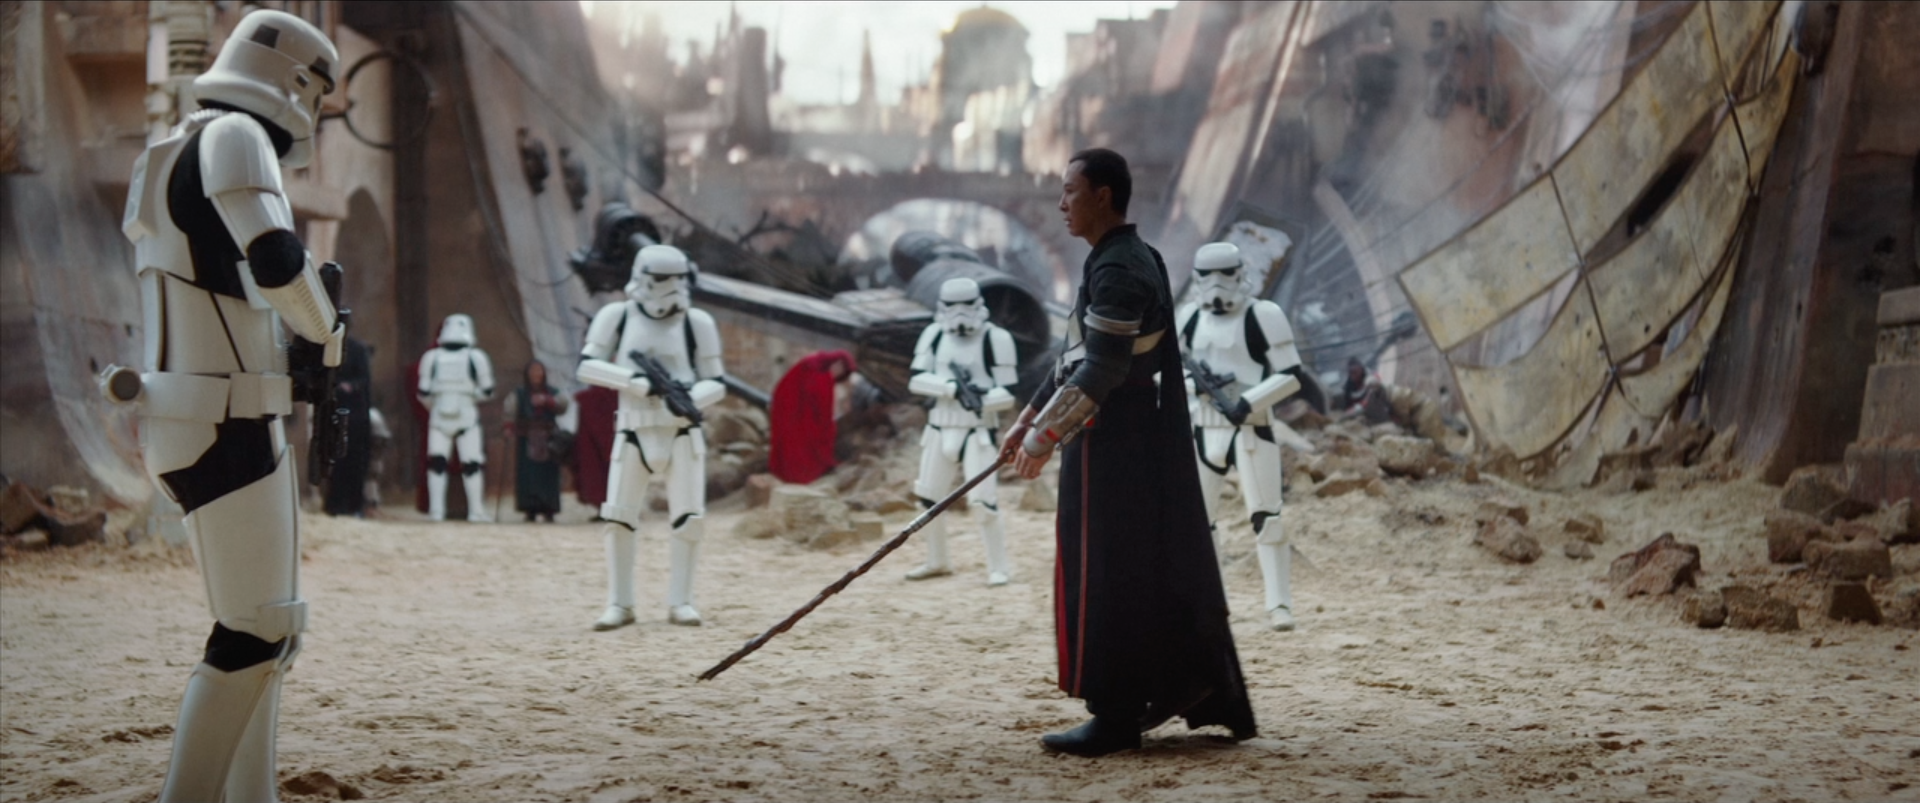 So You Want To Join The Empire: What We Learned About Those Rogue One Troopers In 13 Pictures